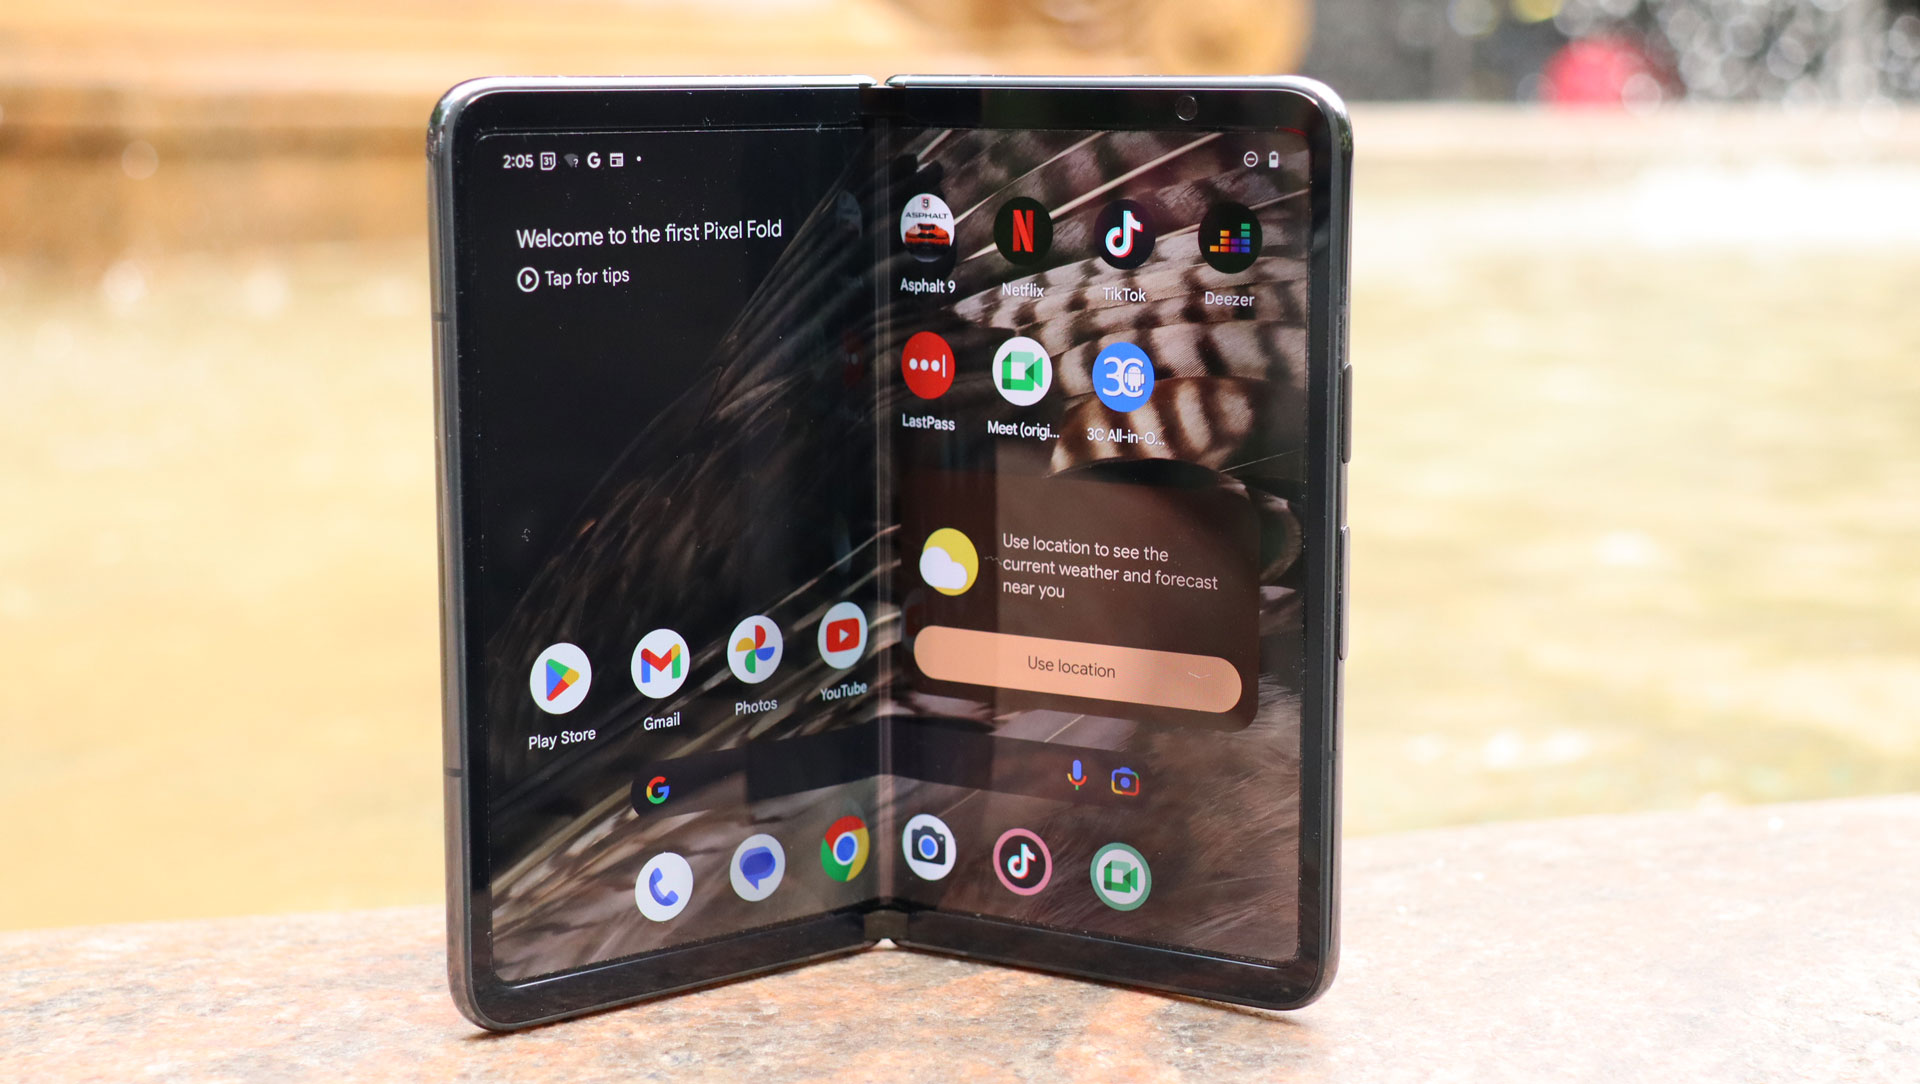 Google's Pixel Fold is a well-rounded take on the foldable form factor